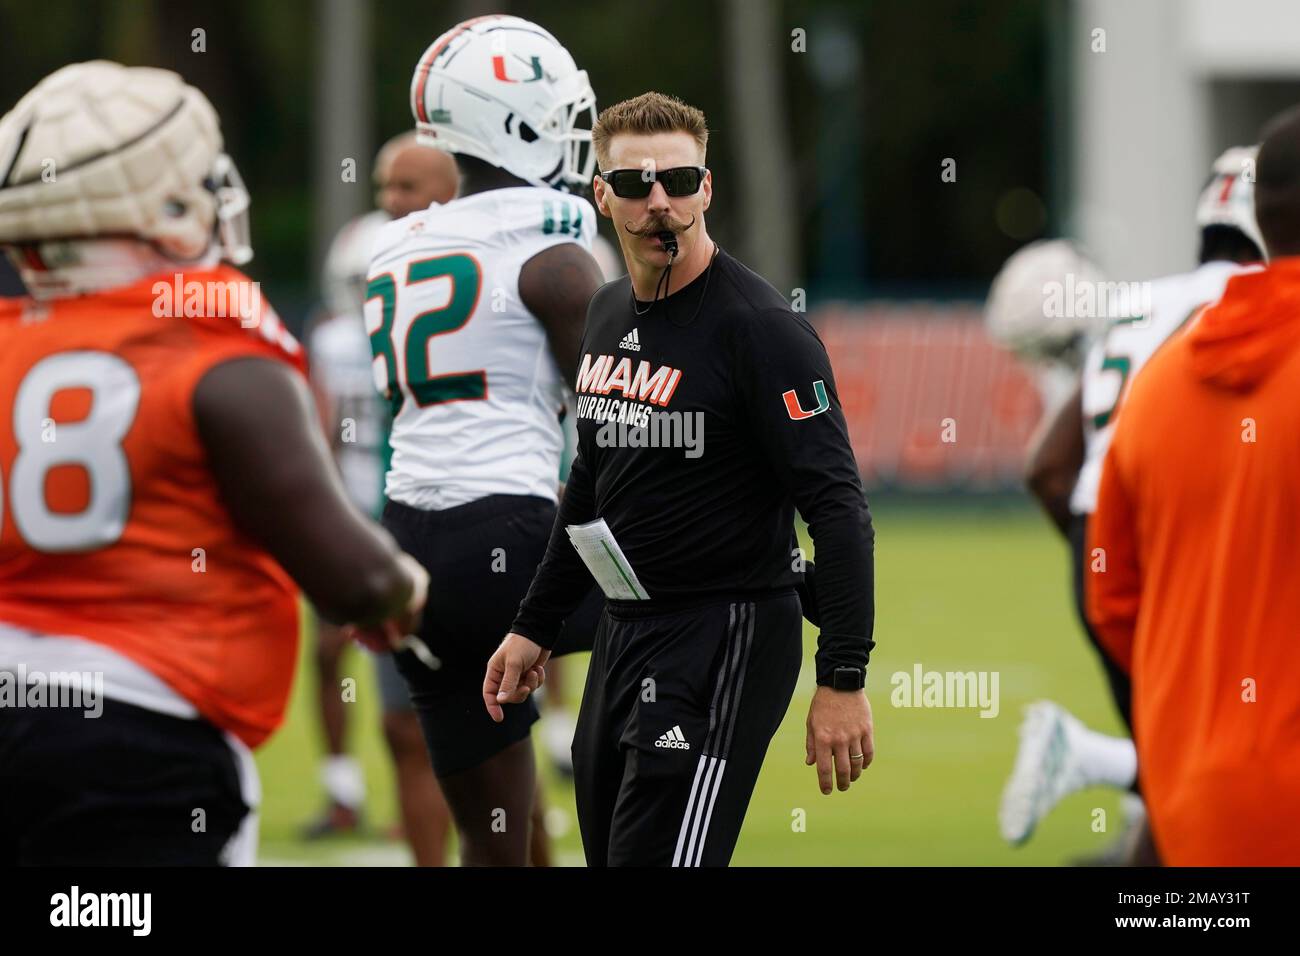 Miami strength coach Aaron Feld supervises the warm up period at the team's  NCAA college football facility, Friday, Aug. 5, 2022, in Coral Gables, Fla.  (AP Photo/Marta Lavandier Stock Photo - Alamy